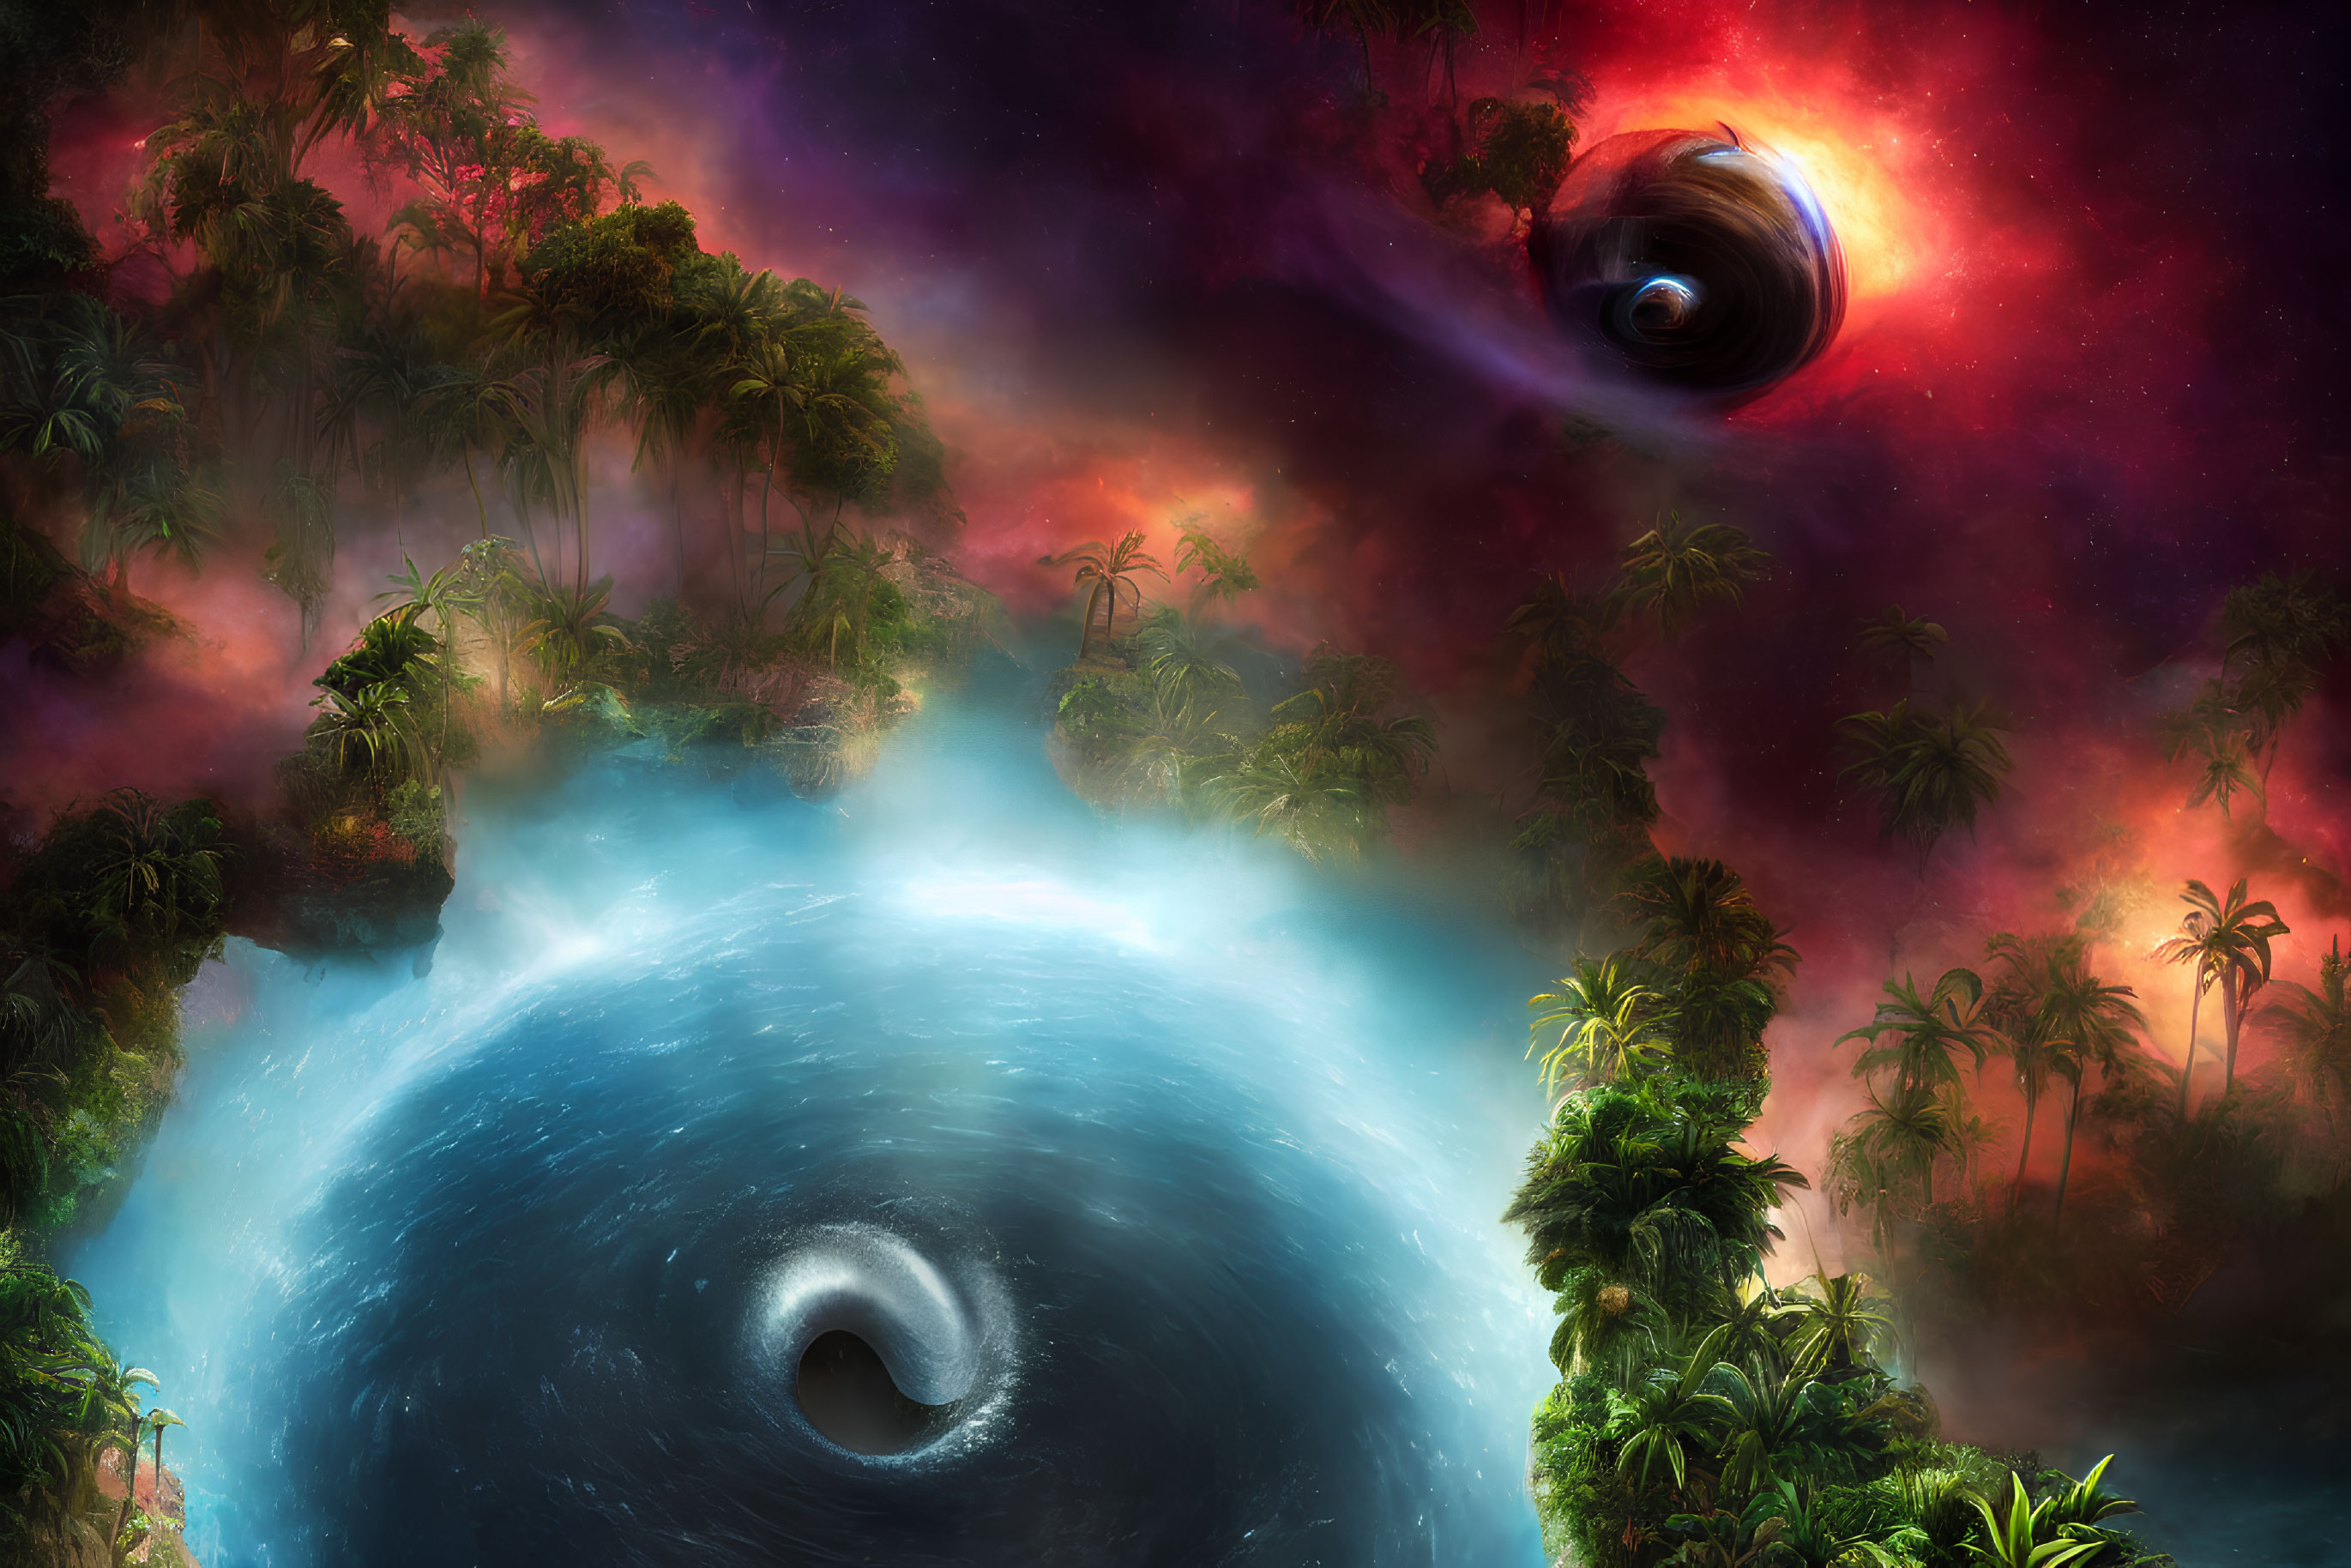 Vibrant cosmic scene with swirling black hole and lush jungle planet